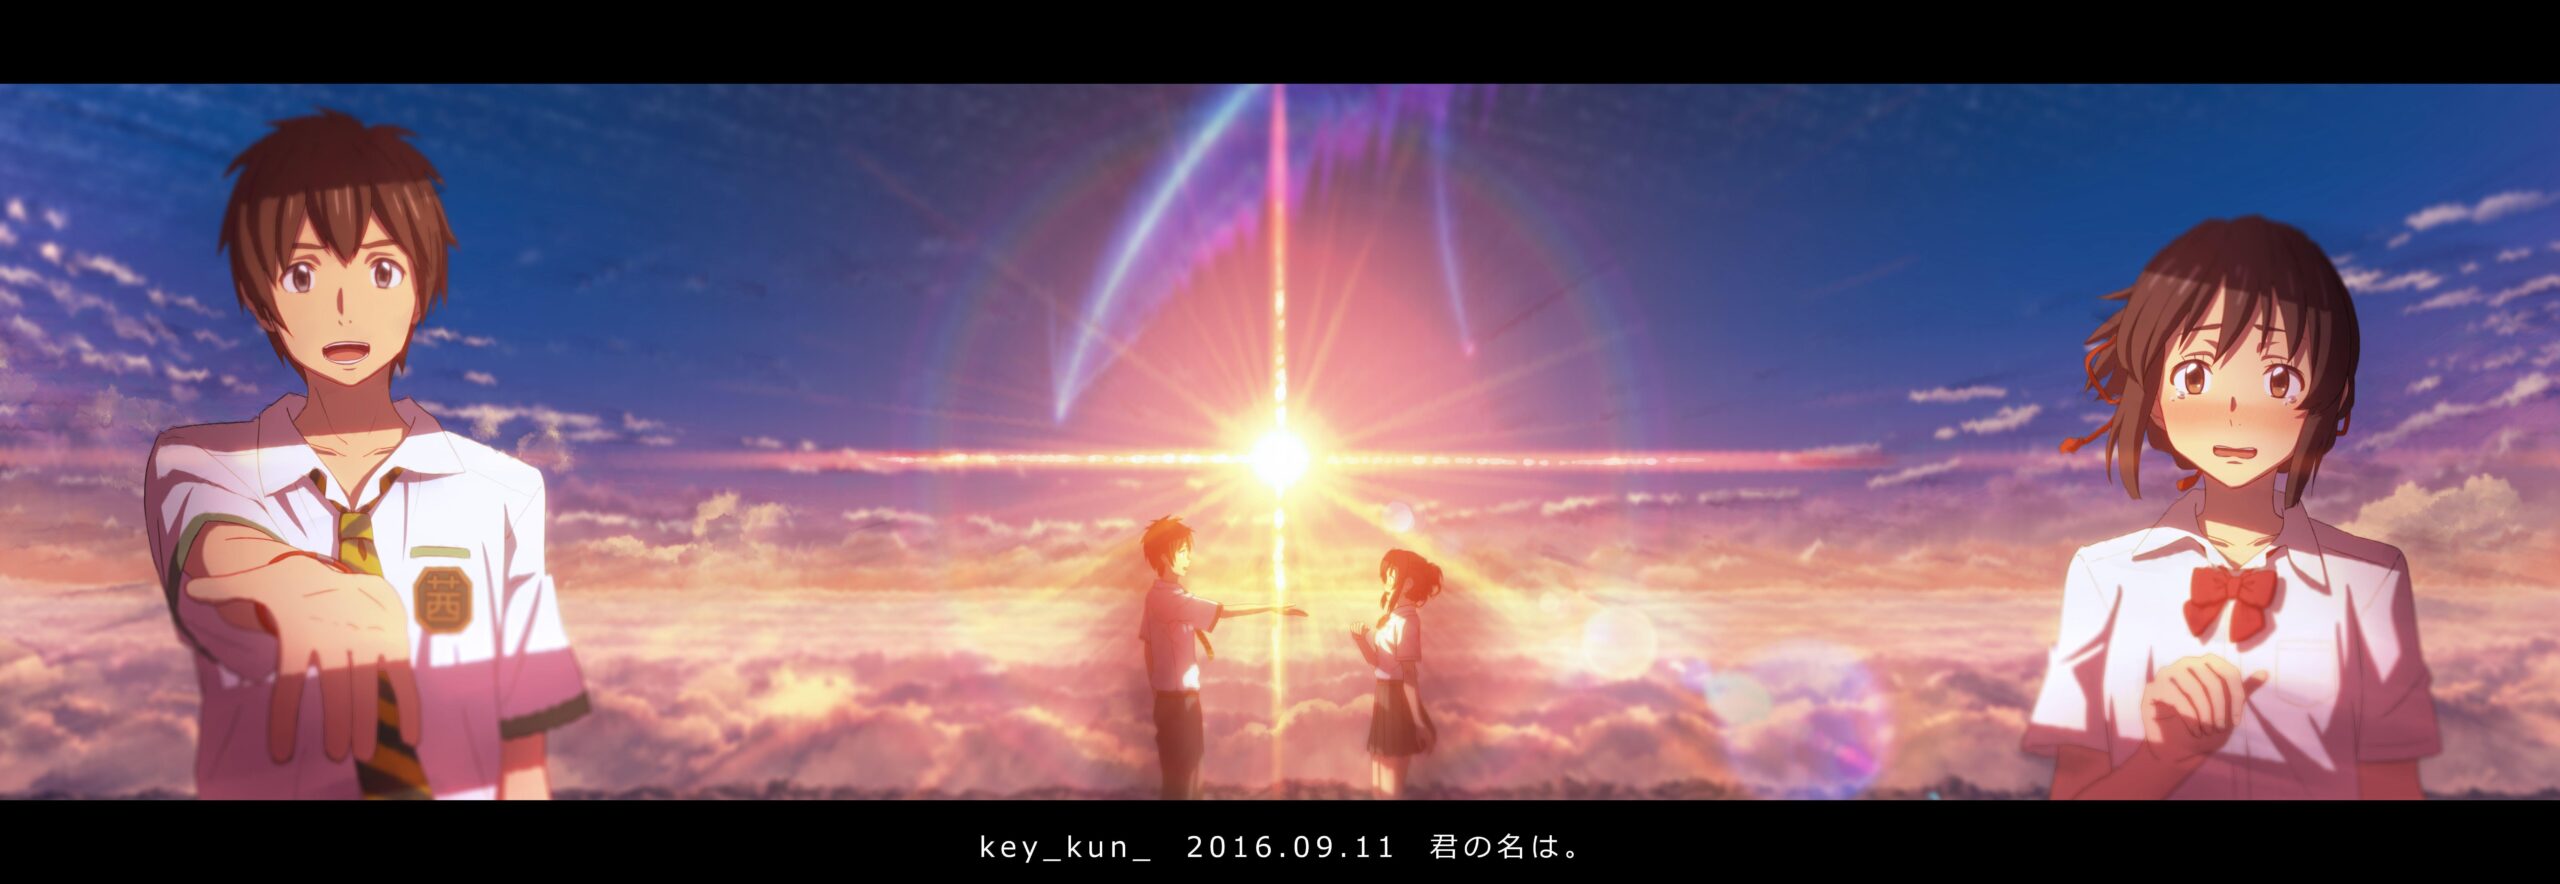 Your Name Wallpaper 4k For Laptop, your name, Anime